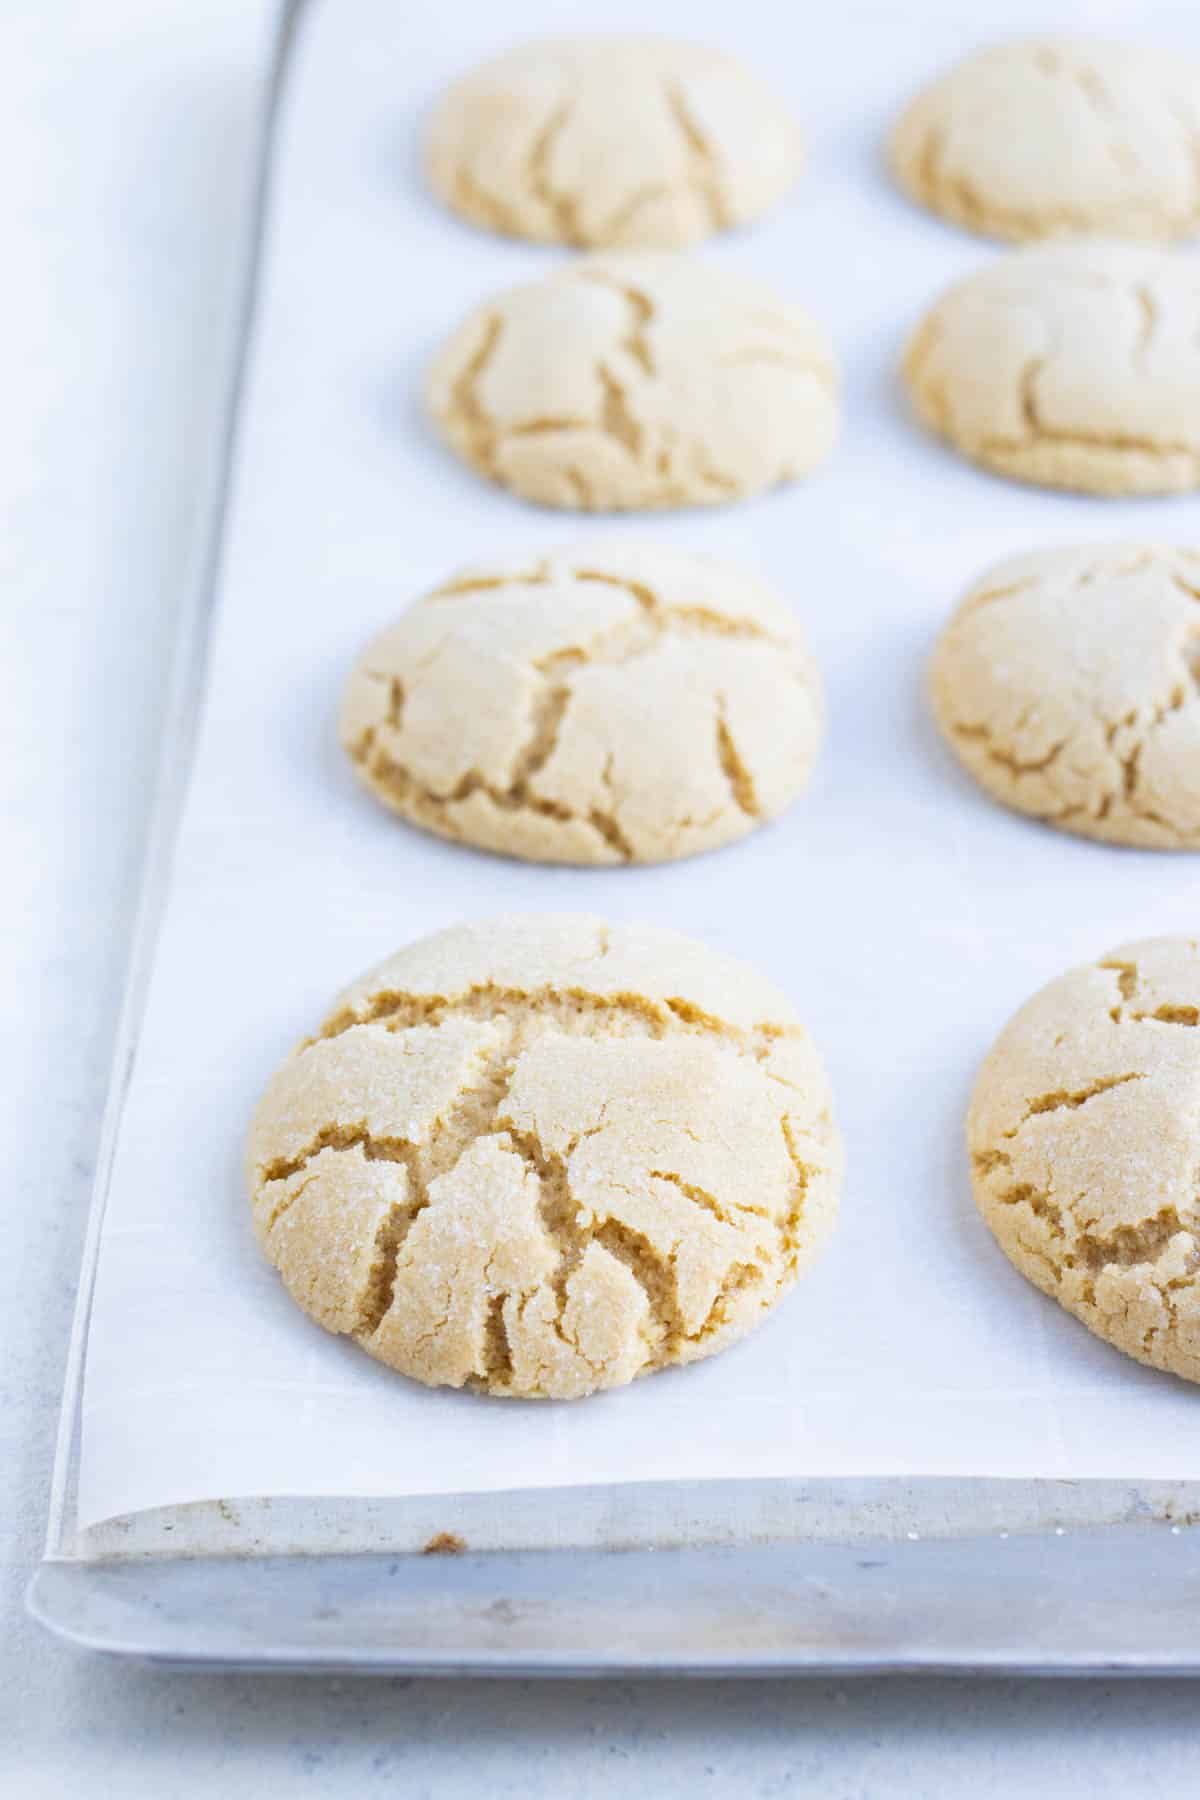 Peanut butter cookies are just out of the oven.